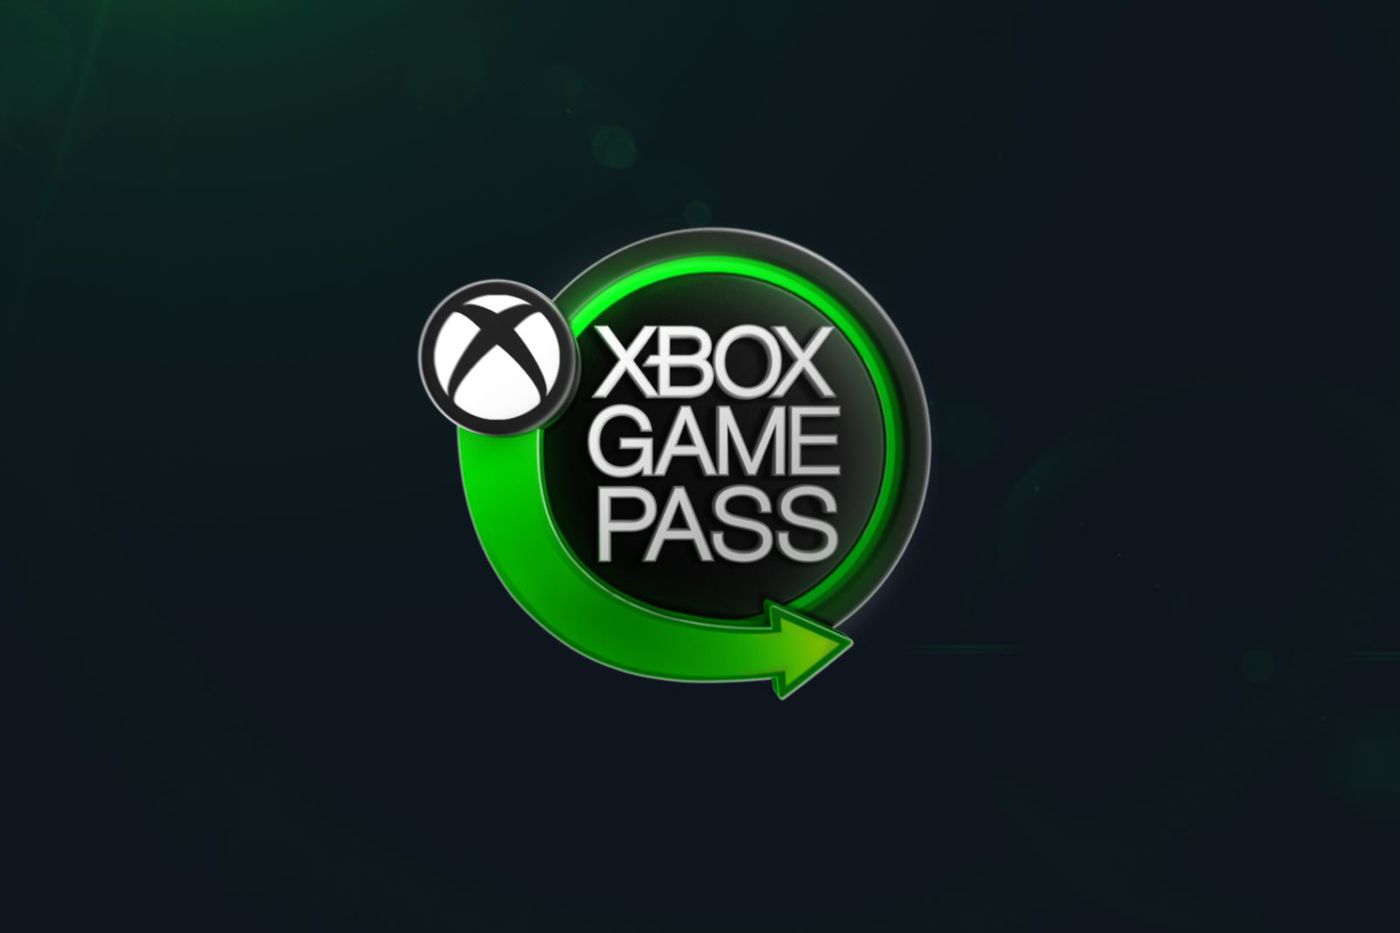 What's coming to Xbox Gamepass in 2021?